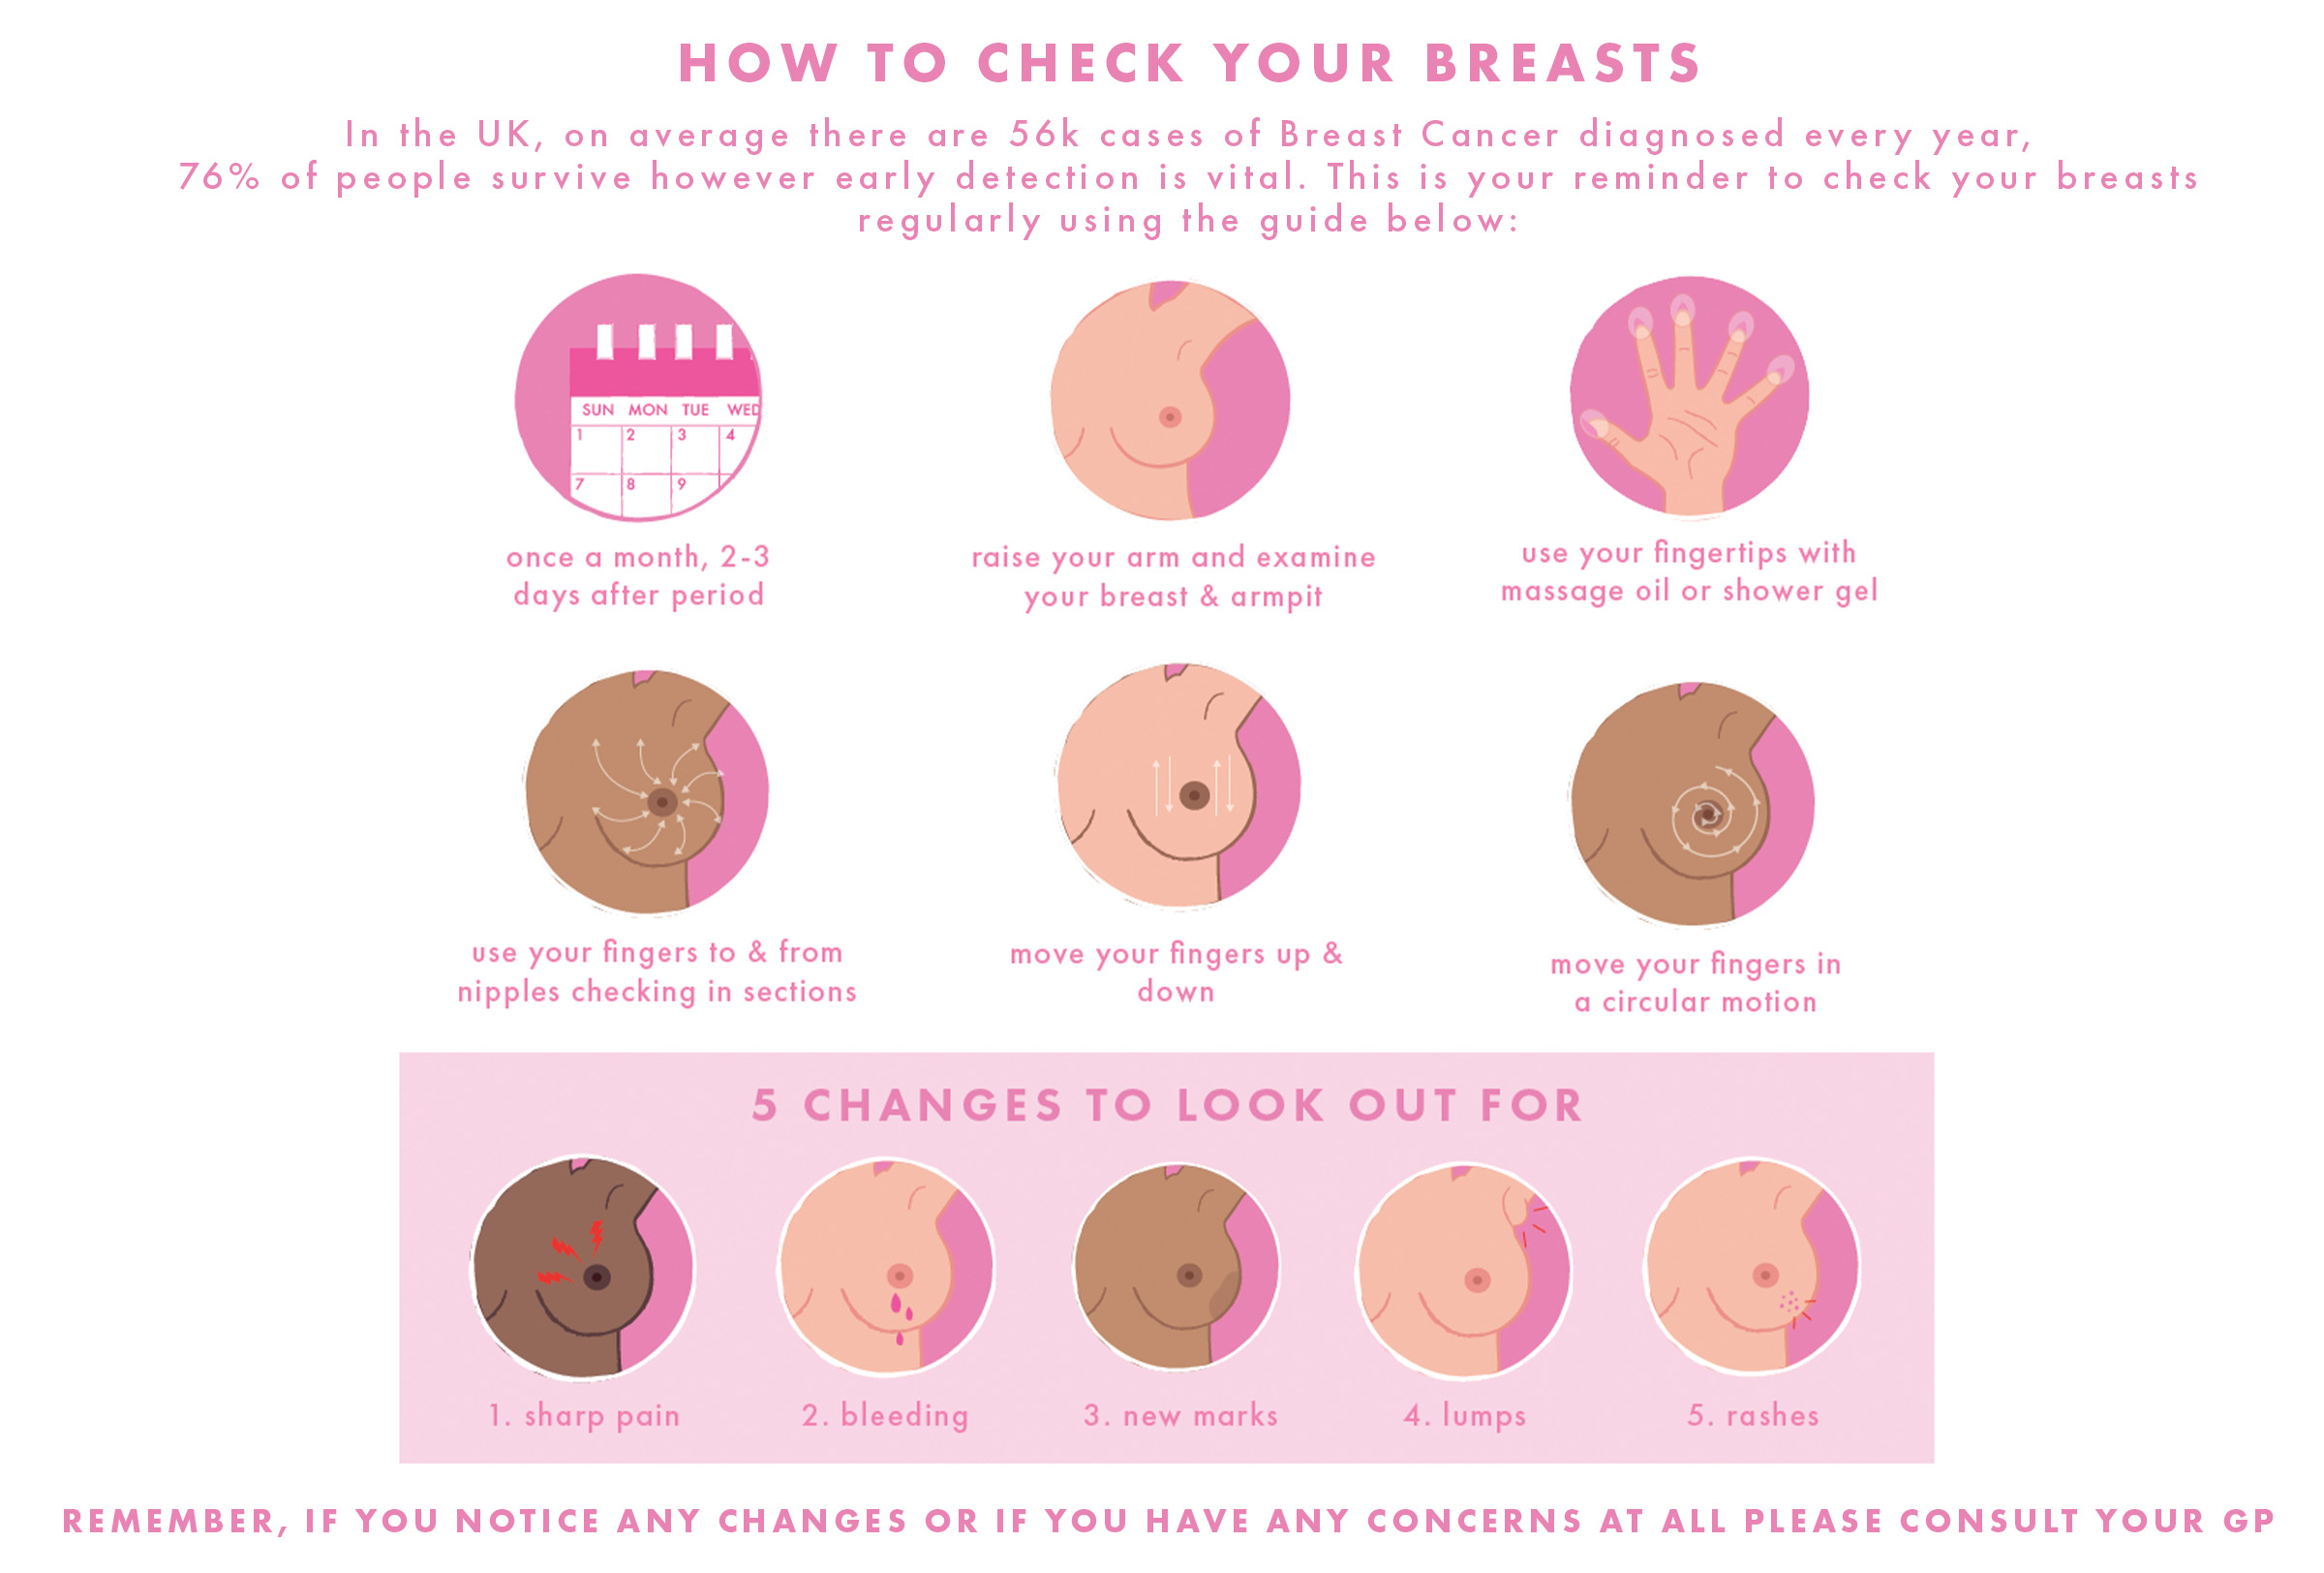 How to check your breasts